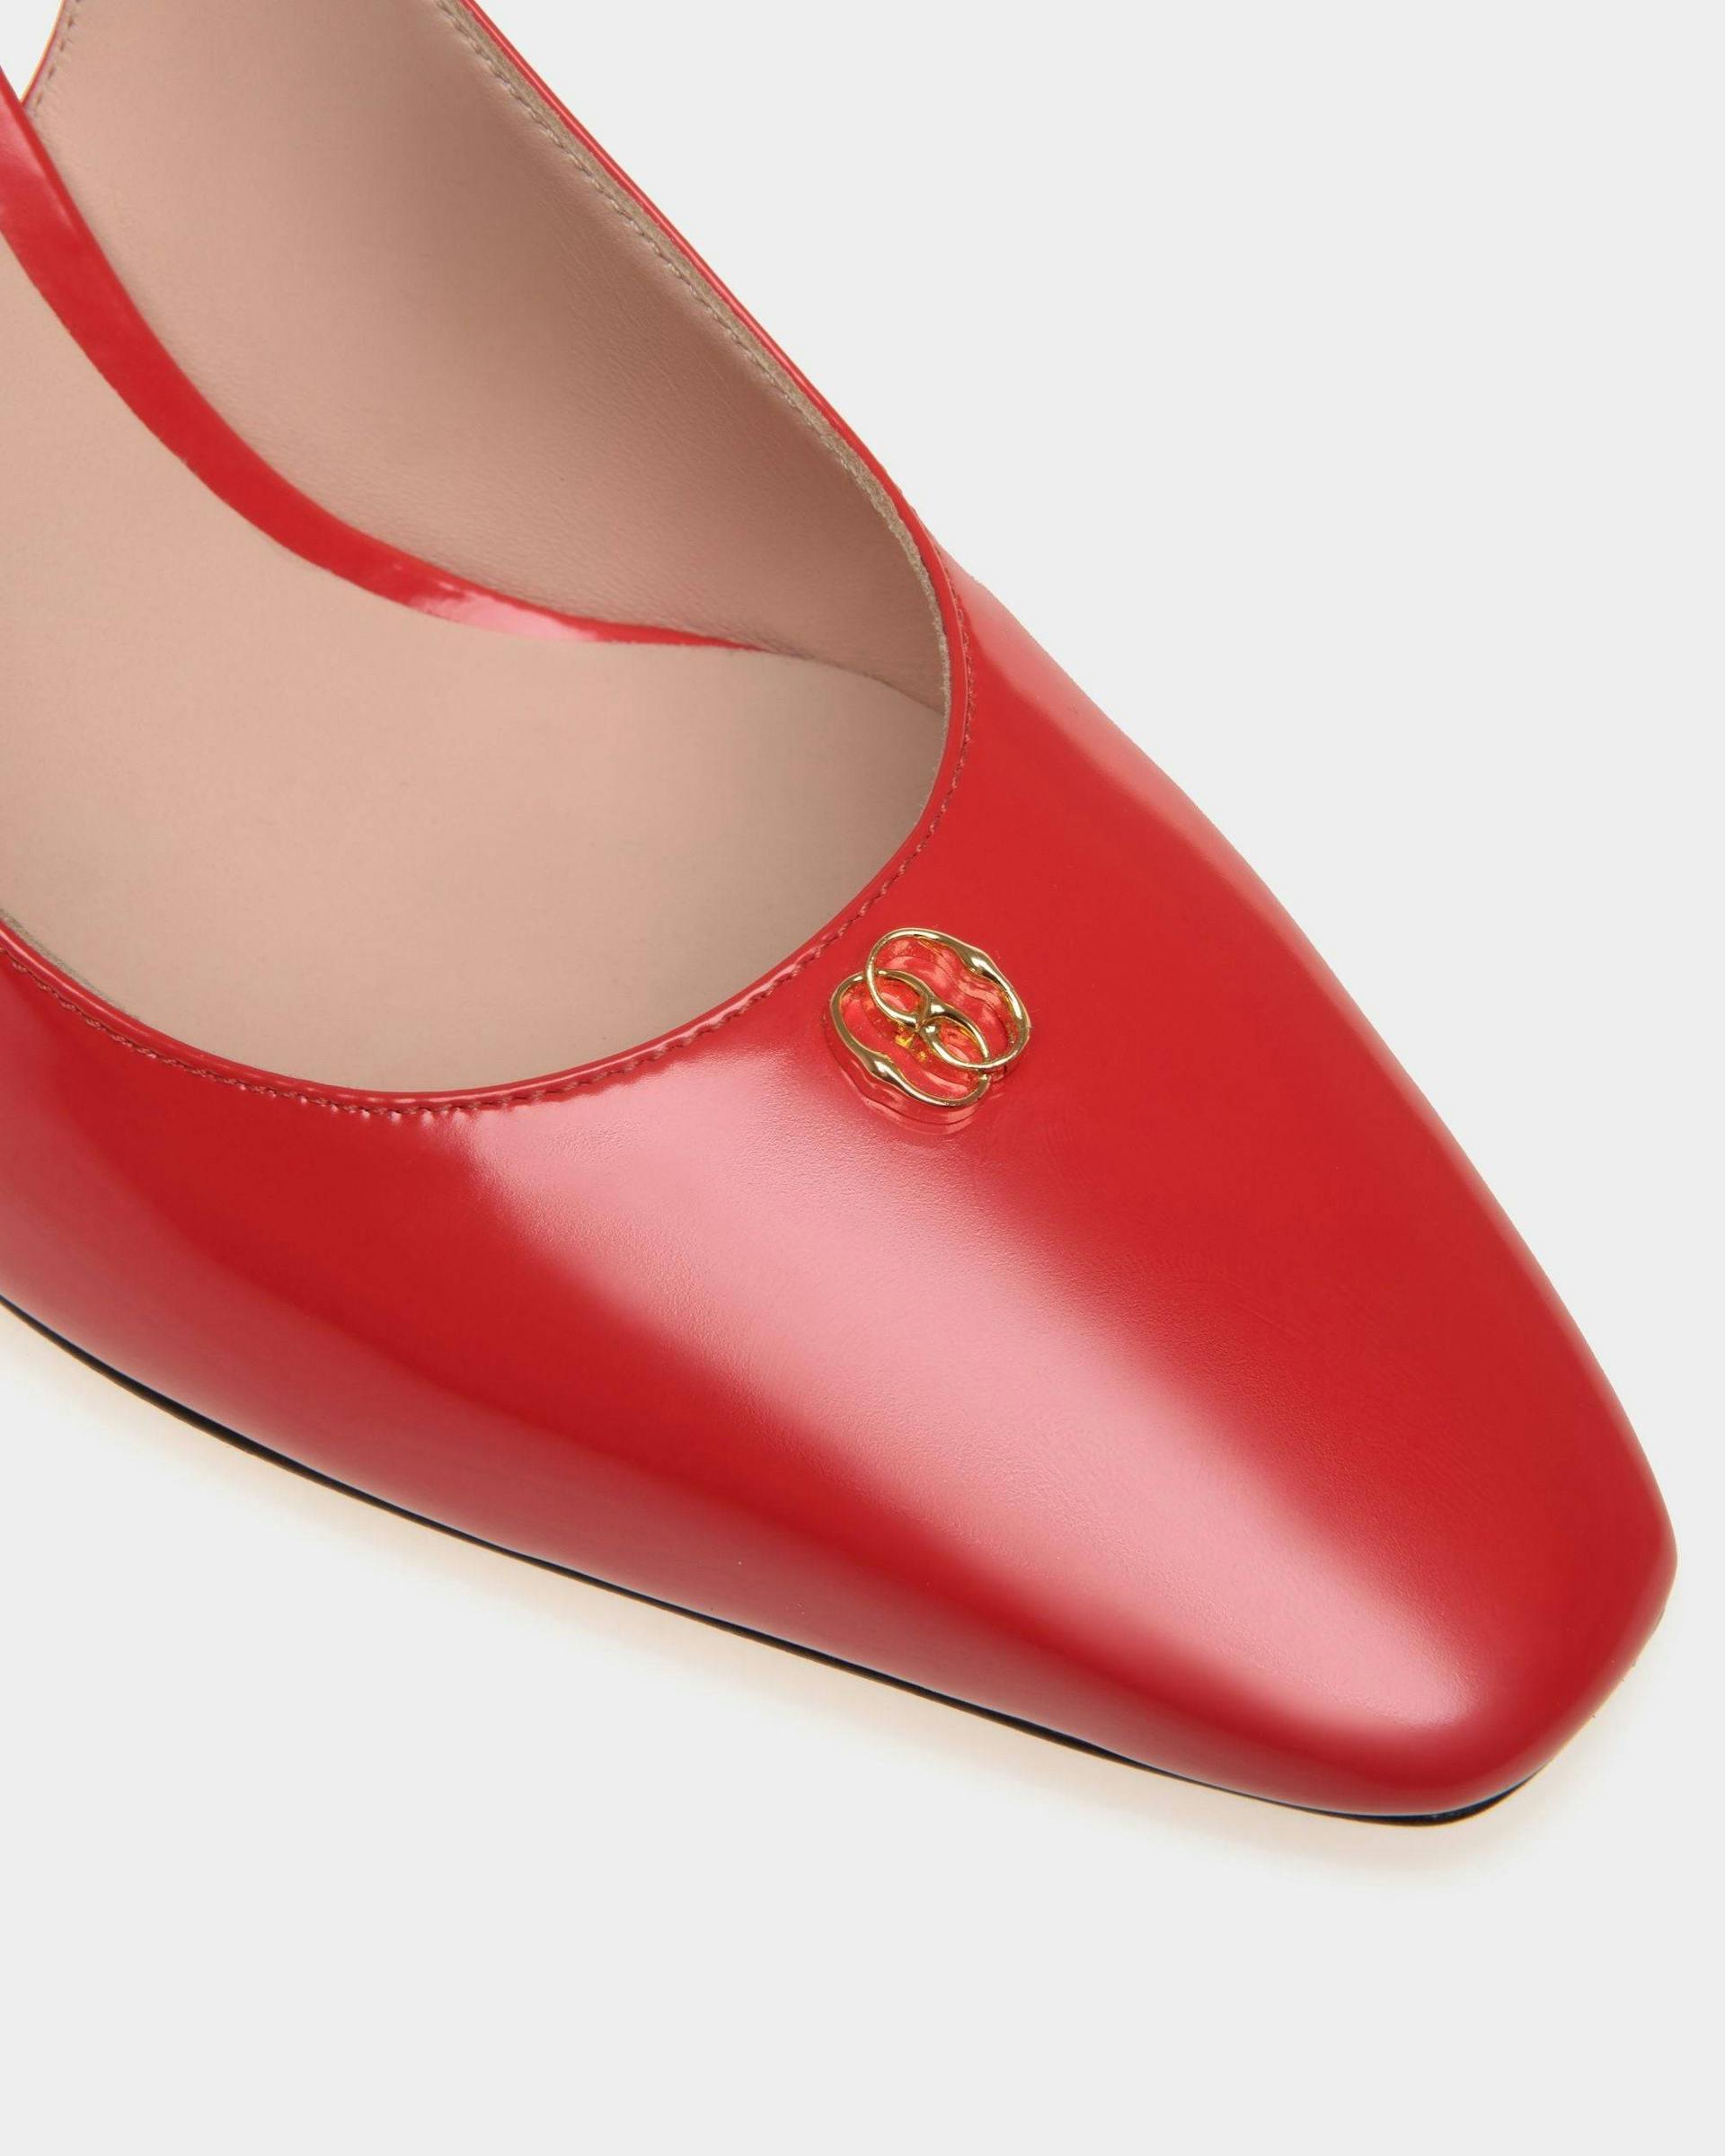 Women's Sylt Slingback Pump In Red Leather | Bally | Still Life Detail